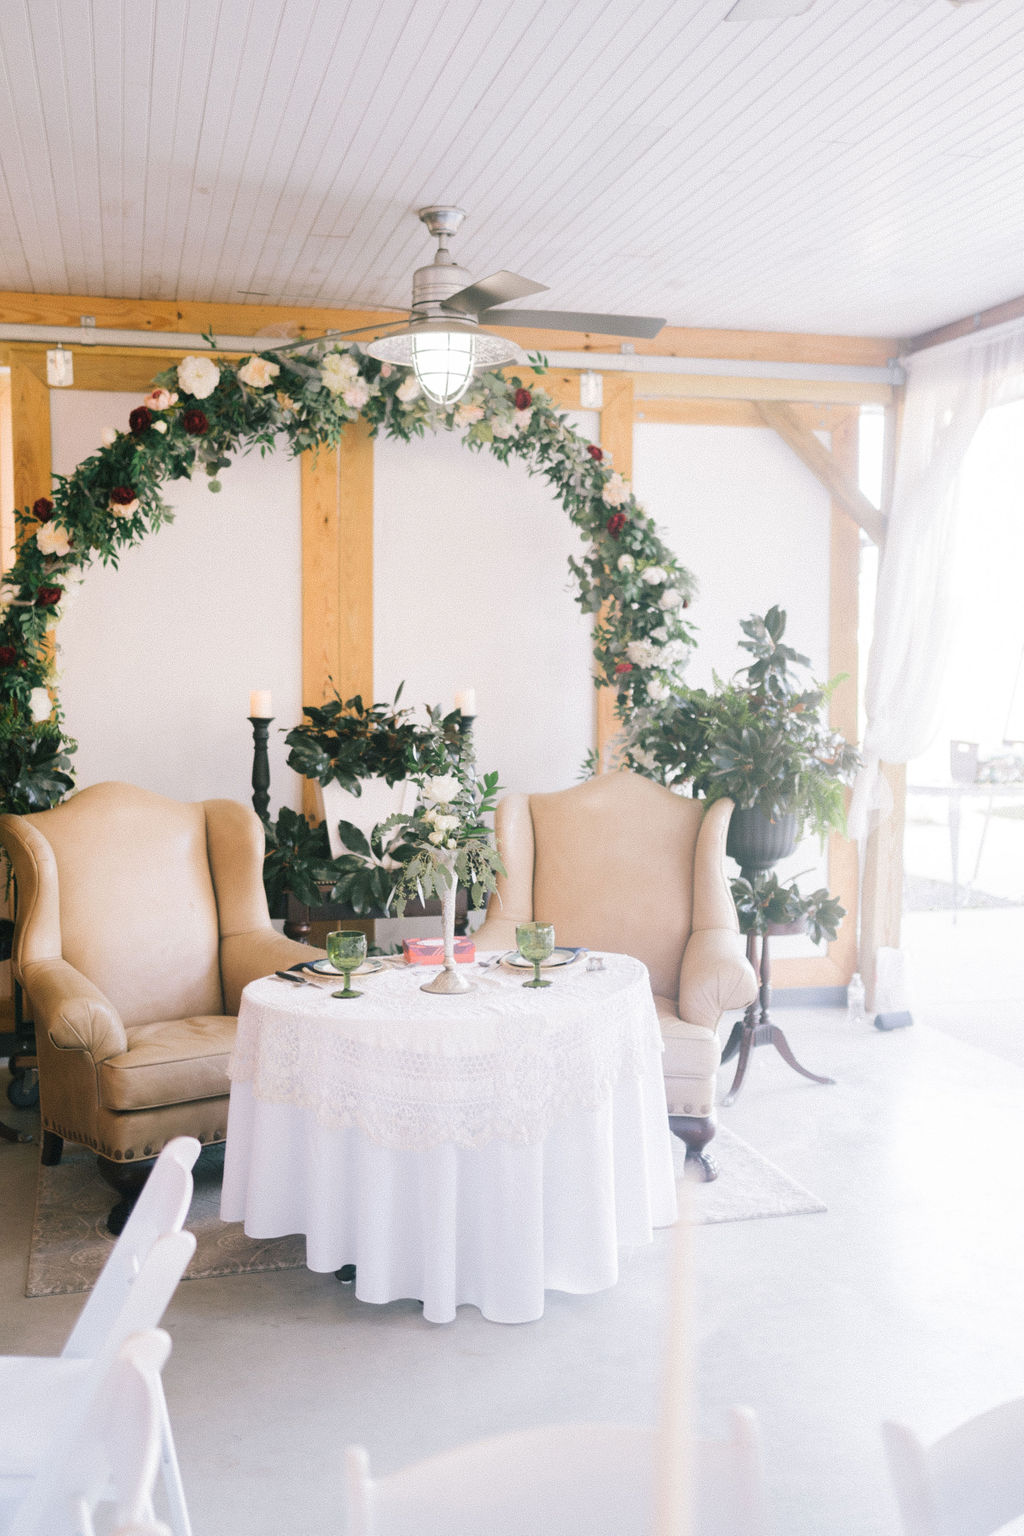 bride and groom sweethearts table with greenery and magnolia decor